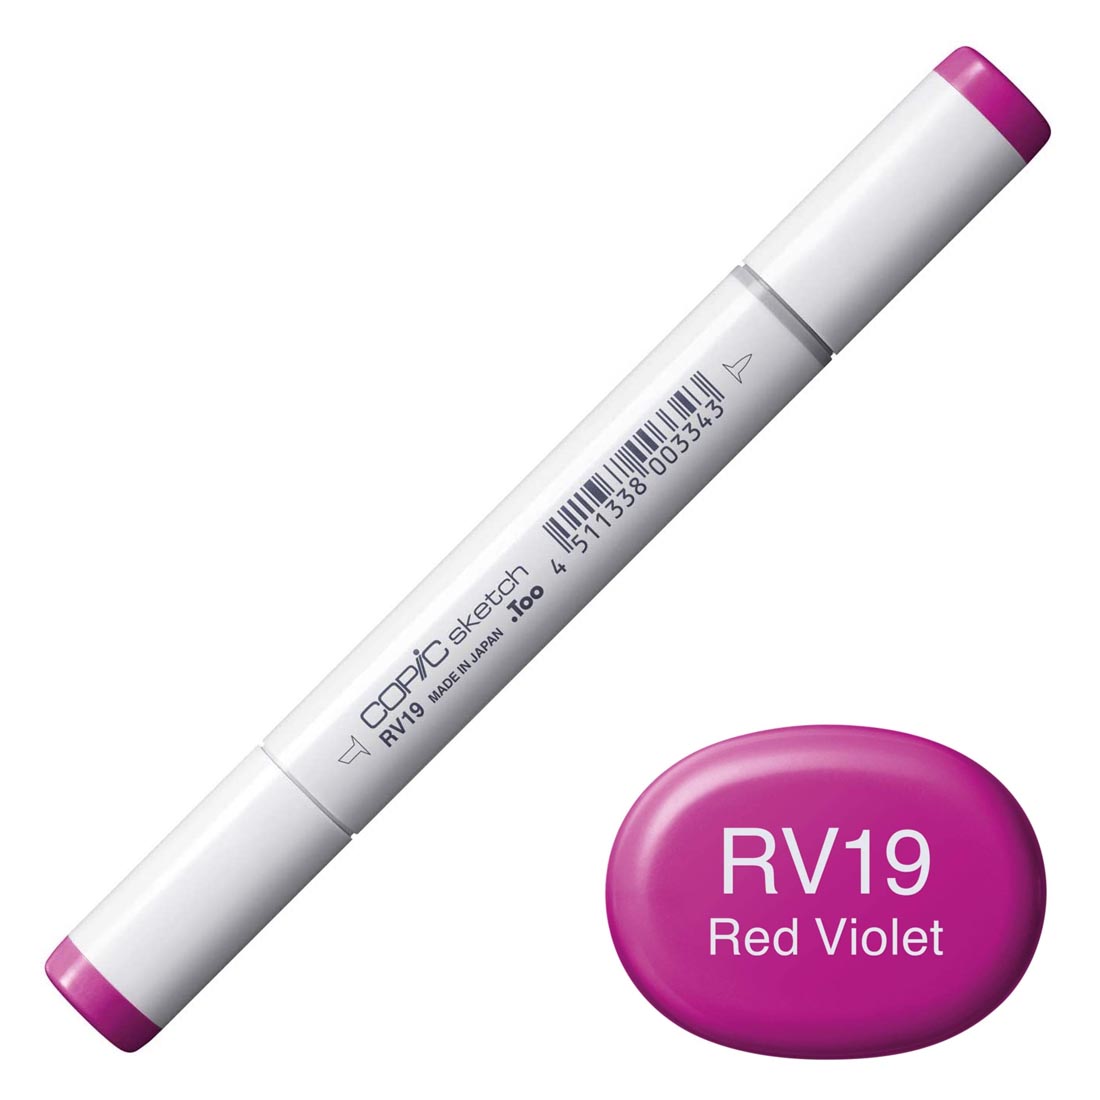 COPIC Sketch Marker with a color swatch and text of RV19 Red Violet